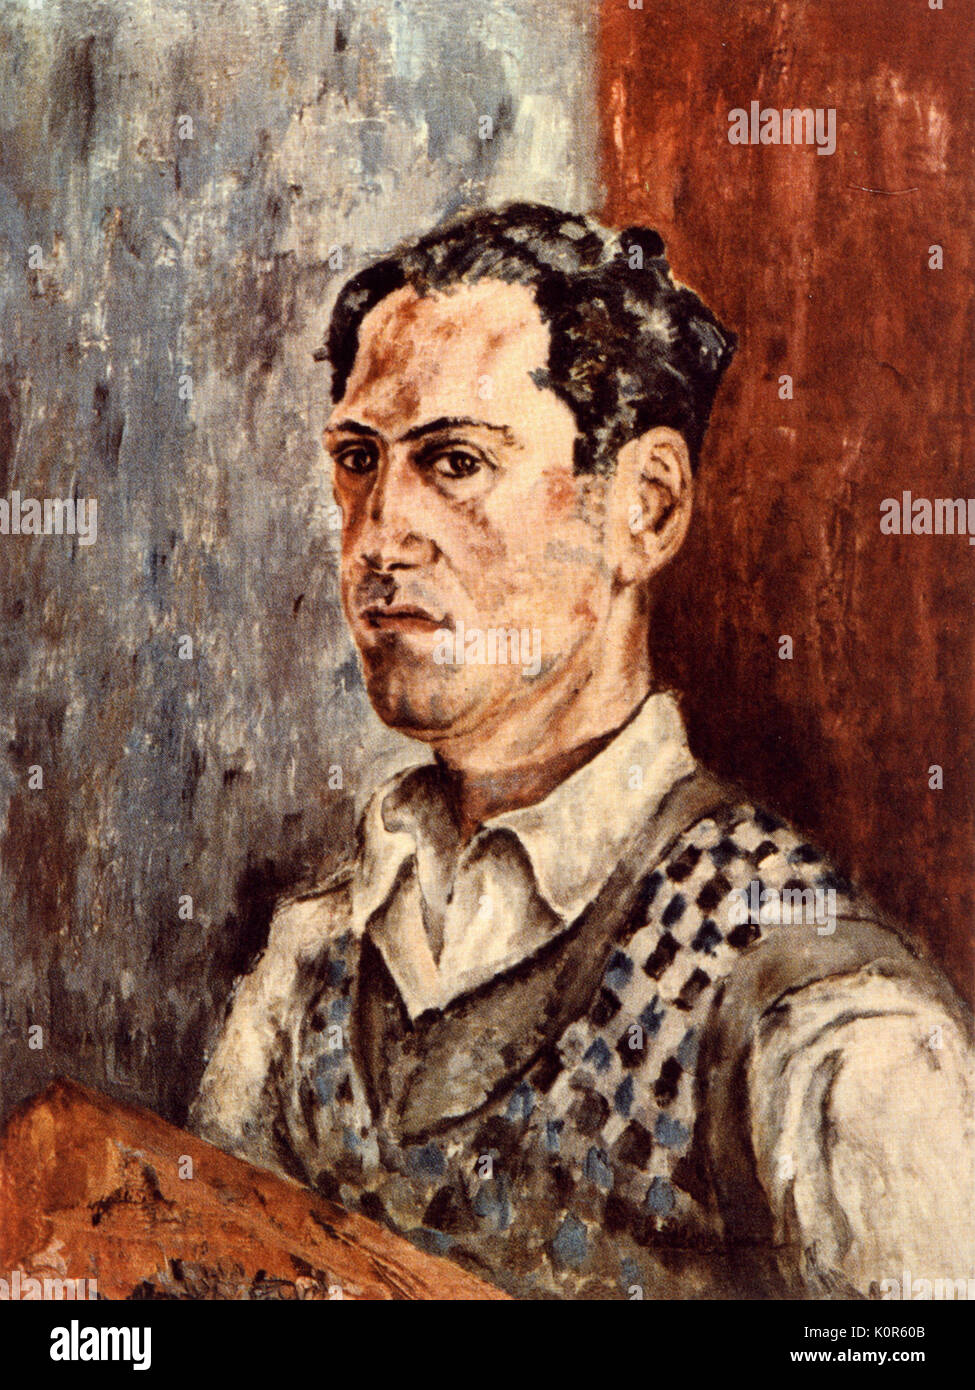 Gershwin, George 1936 self-portrait 1898-1937.  American composer and pianist. Stock Photo